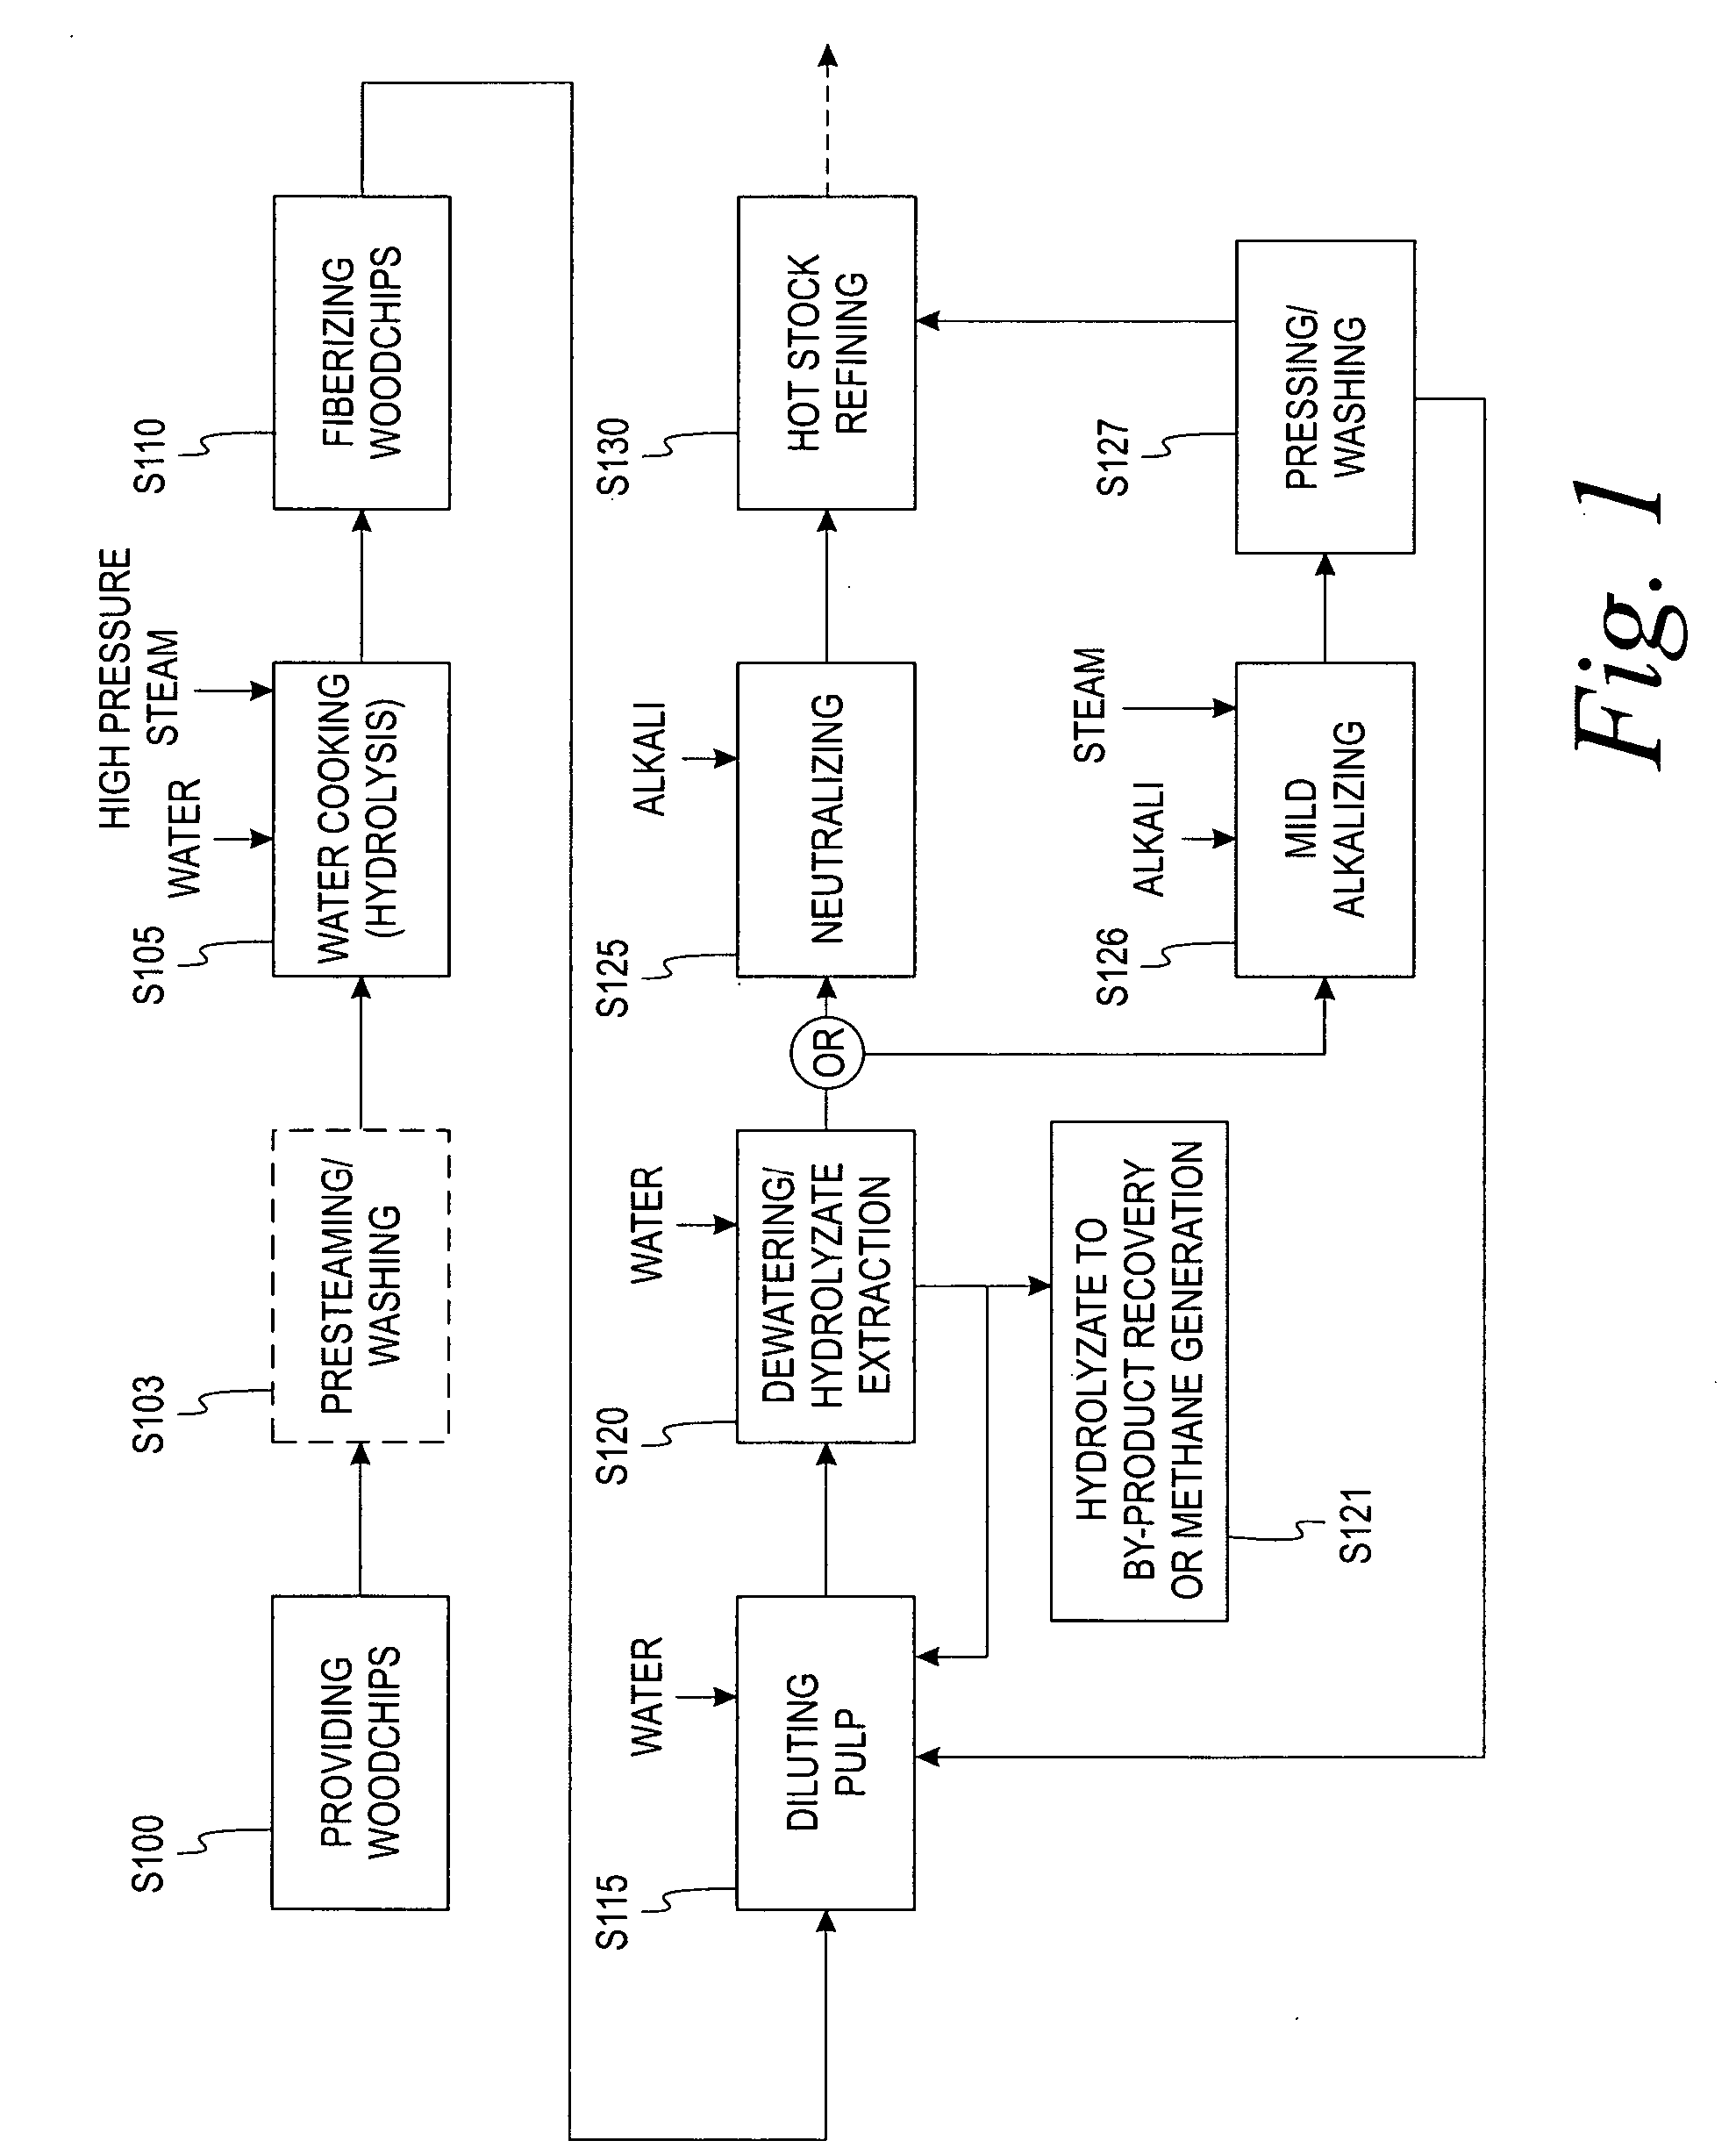 Method of manufacturing pulp and articles made therefrom